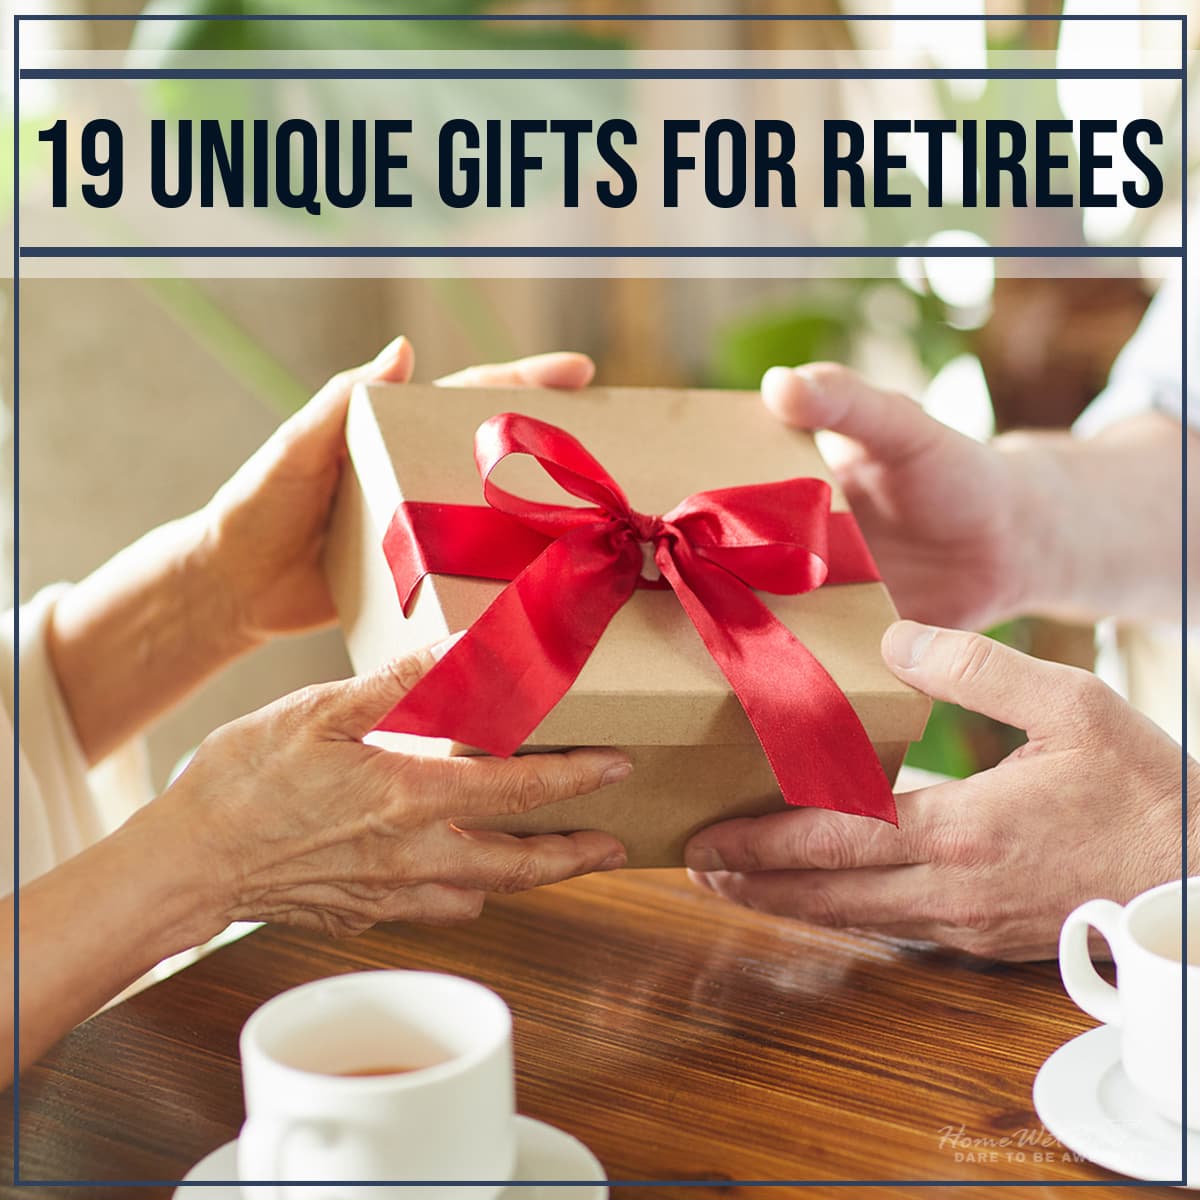 19 Unique Gifts for Retirees